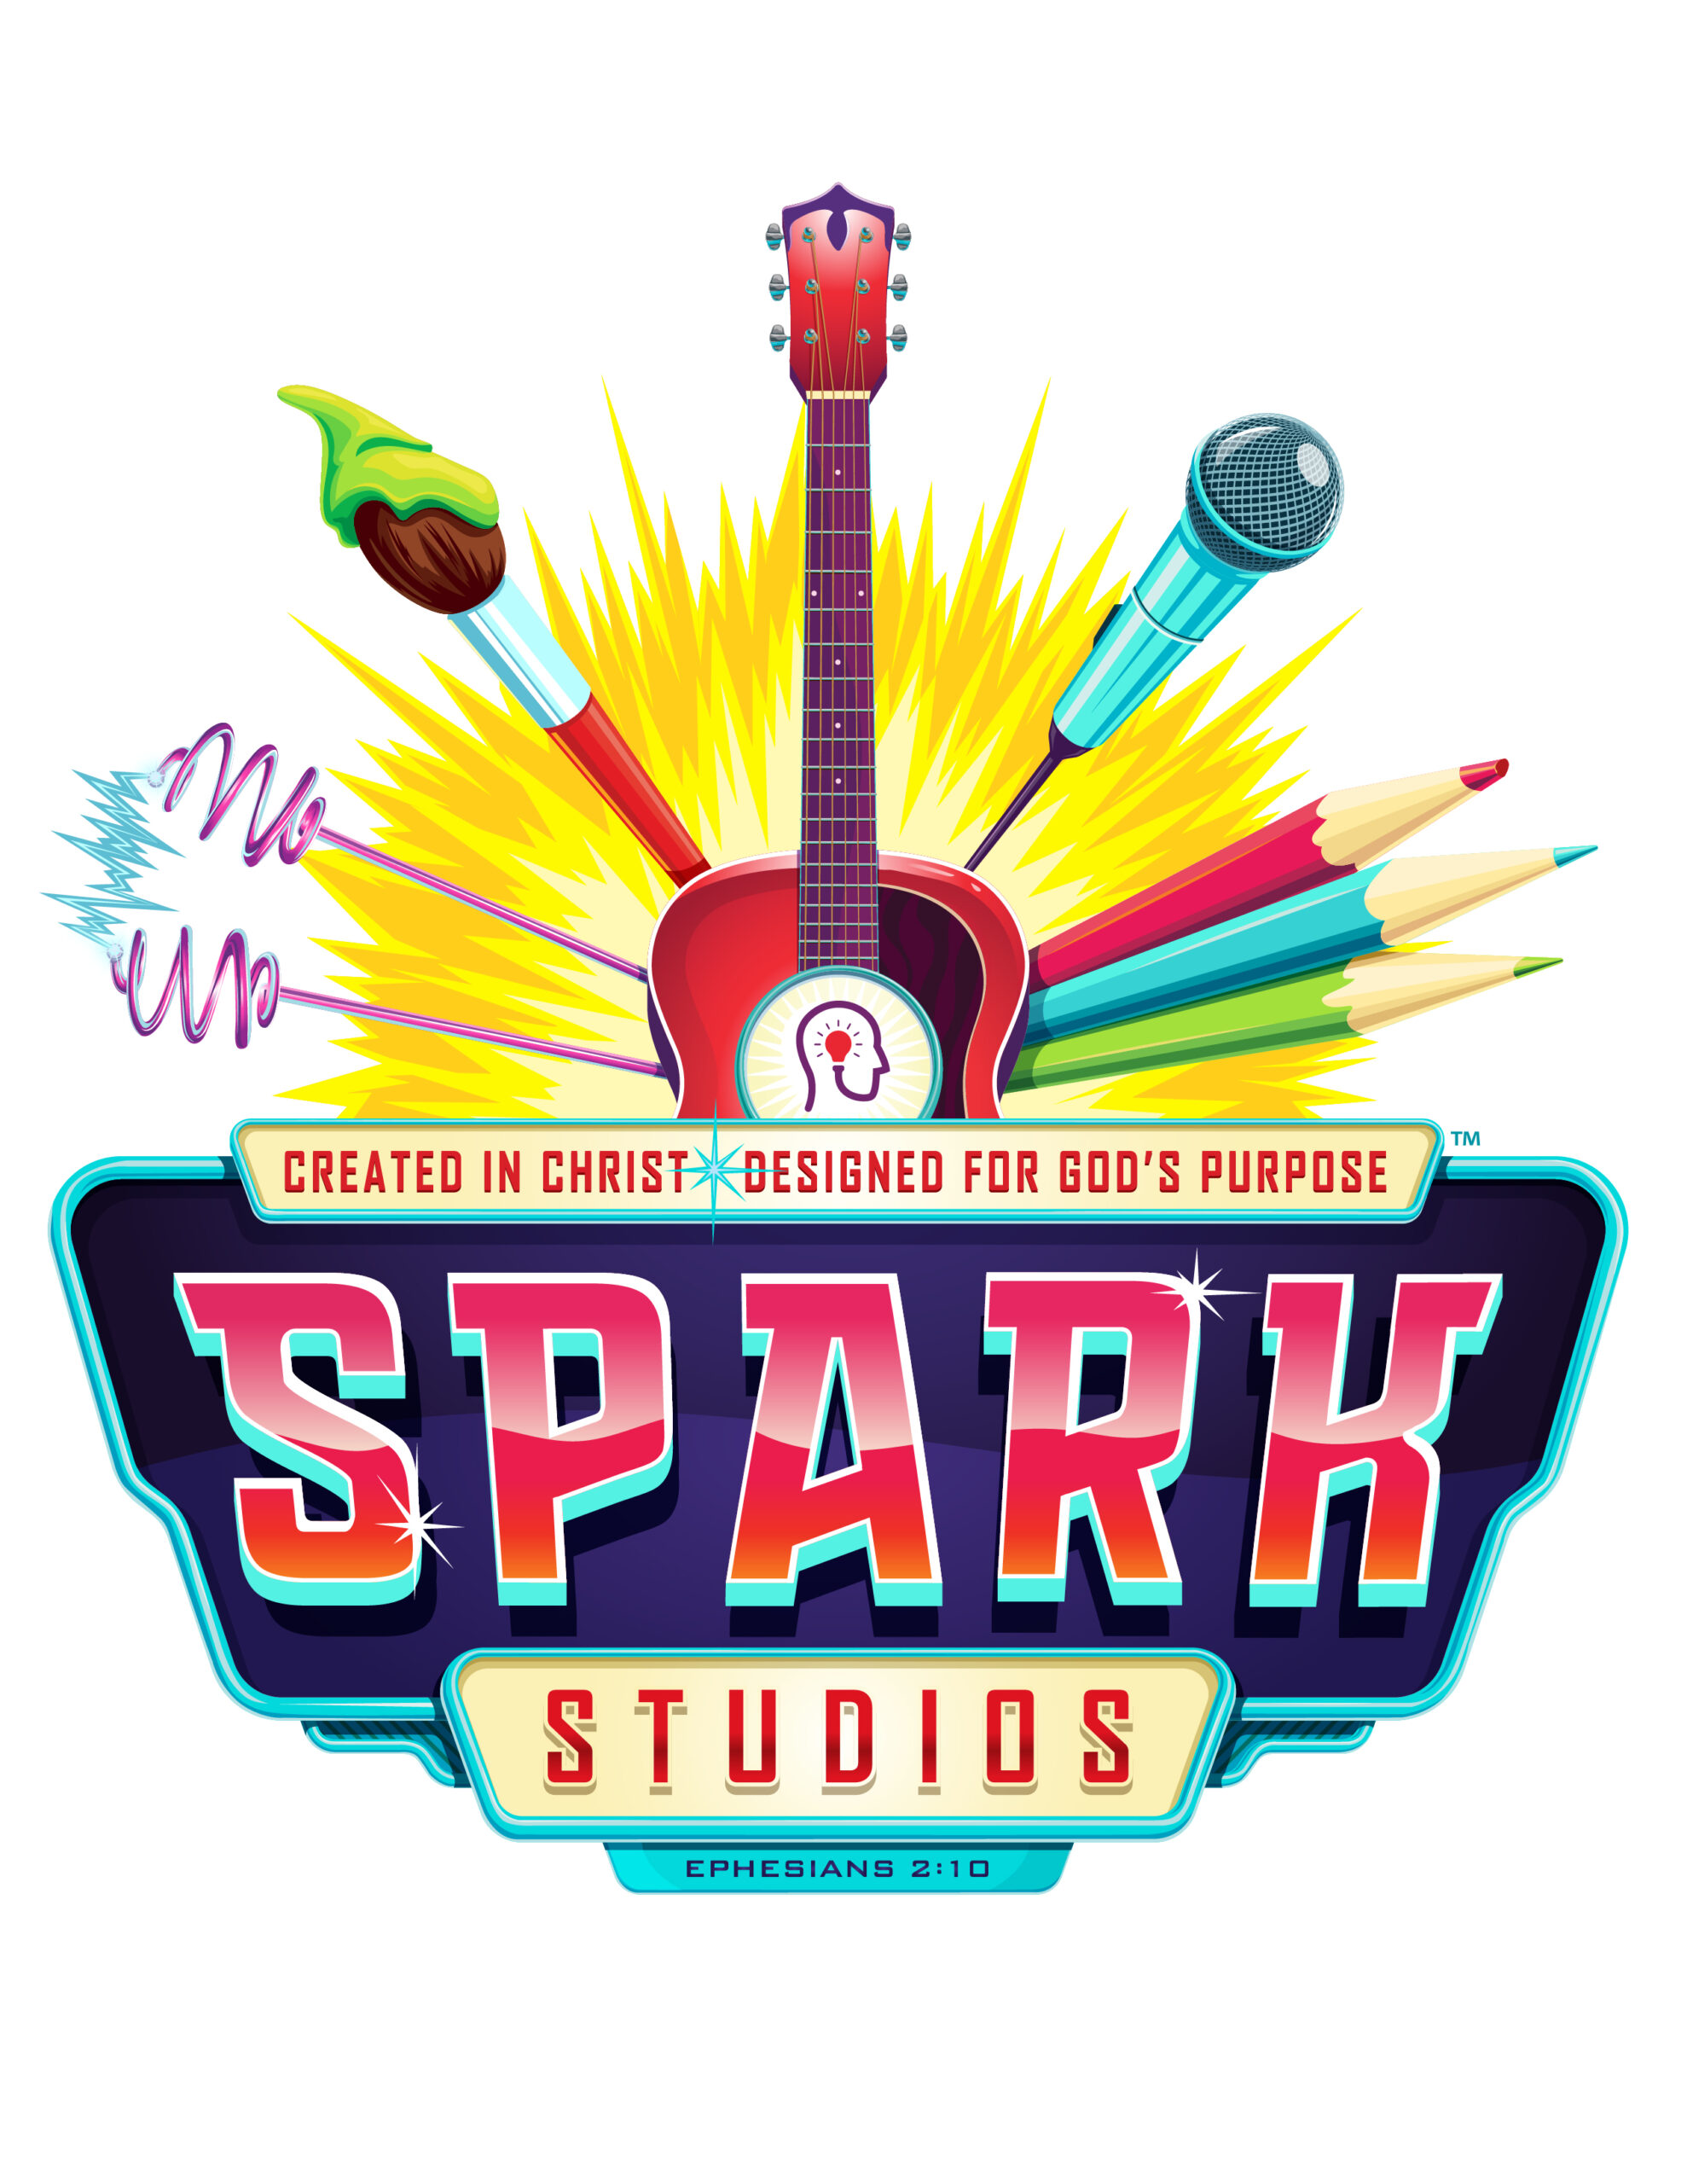 SPark studio vbs logo. includes a guitar, paintbrush, colored pencils, microphone, and electric current. Text says: created in christ, designed for god's purpose. spark studios. Ephesians 2:10.